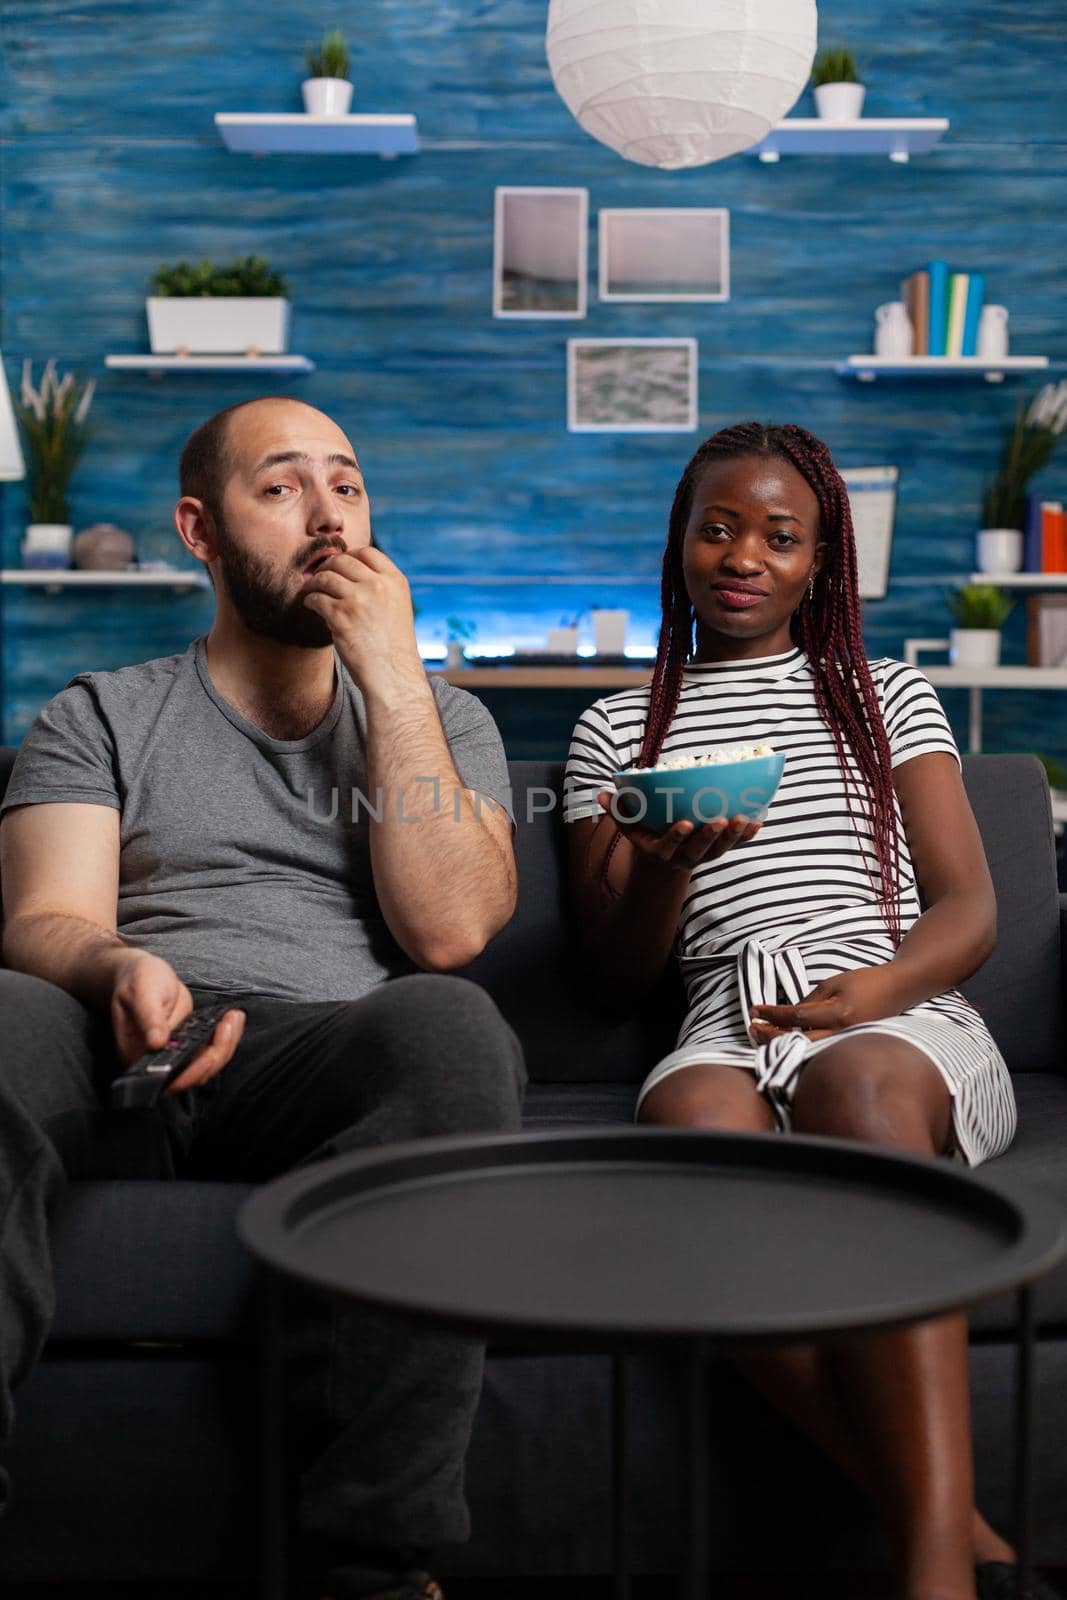 Interracial couple sitting on couch watching television by DCStudio